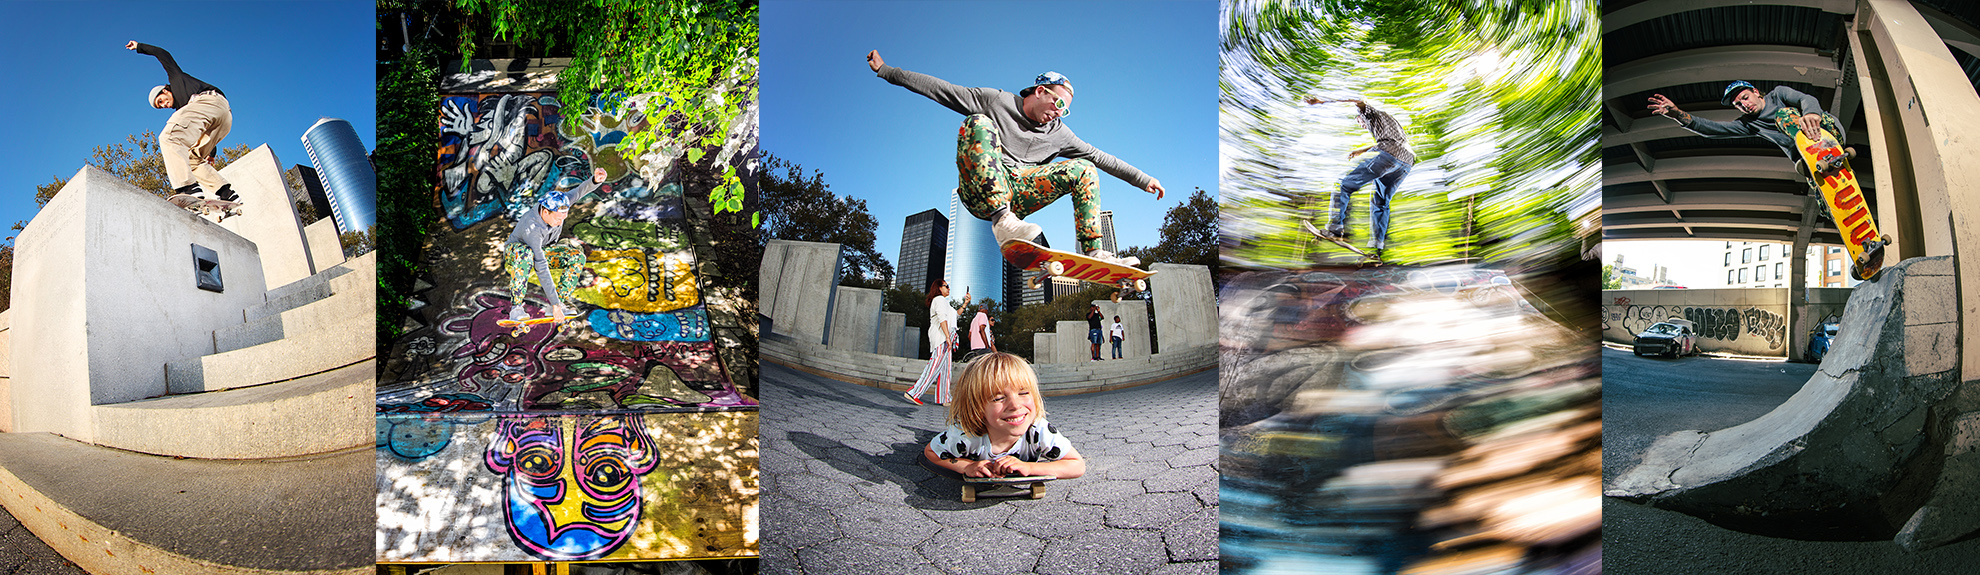 Skateboard photography with the Canon EOS 90D